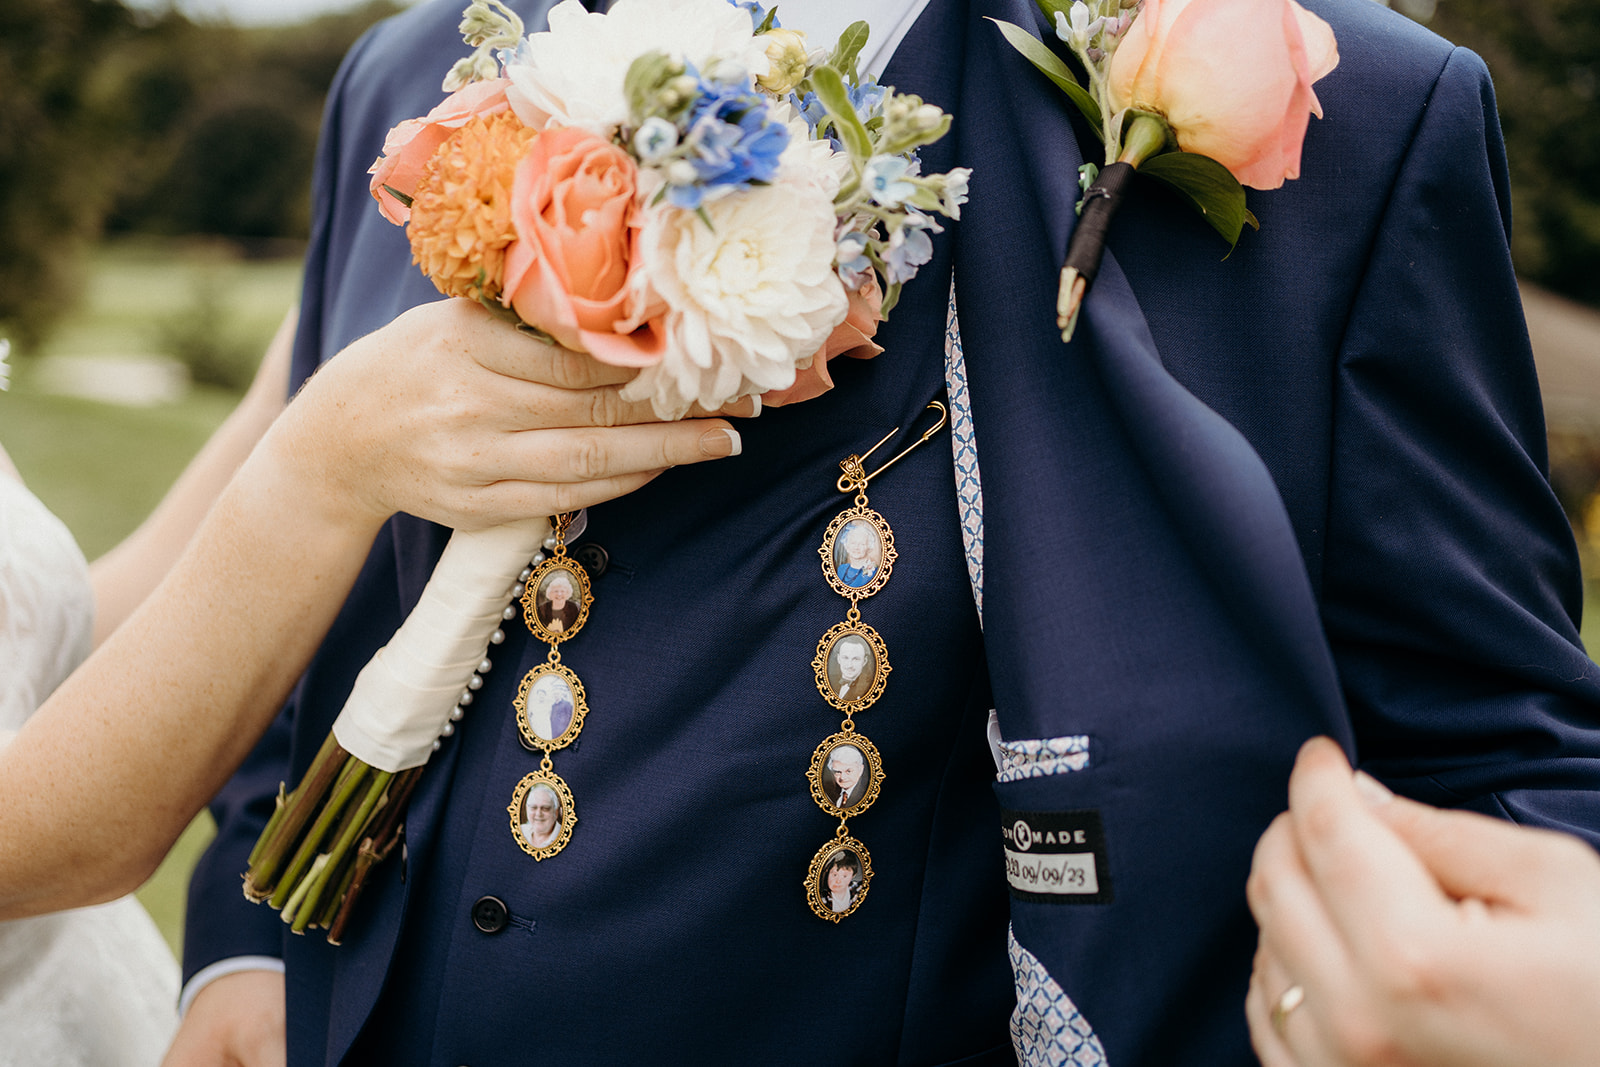 Portraits pinned to a jacket with a bouquet of flowers.